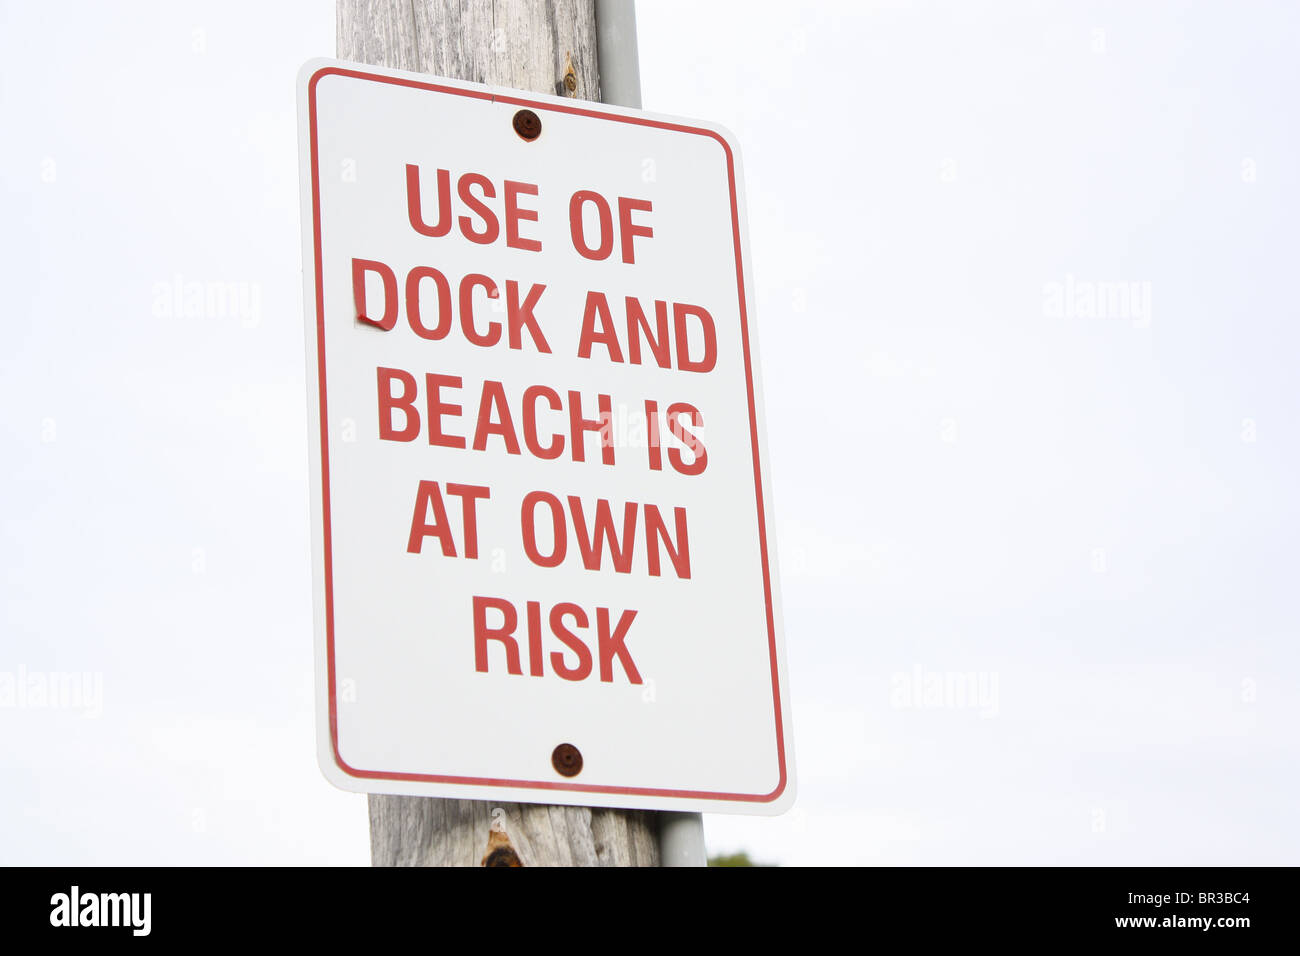 use of dock and beach is at own risk sign Stock Photo